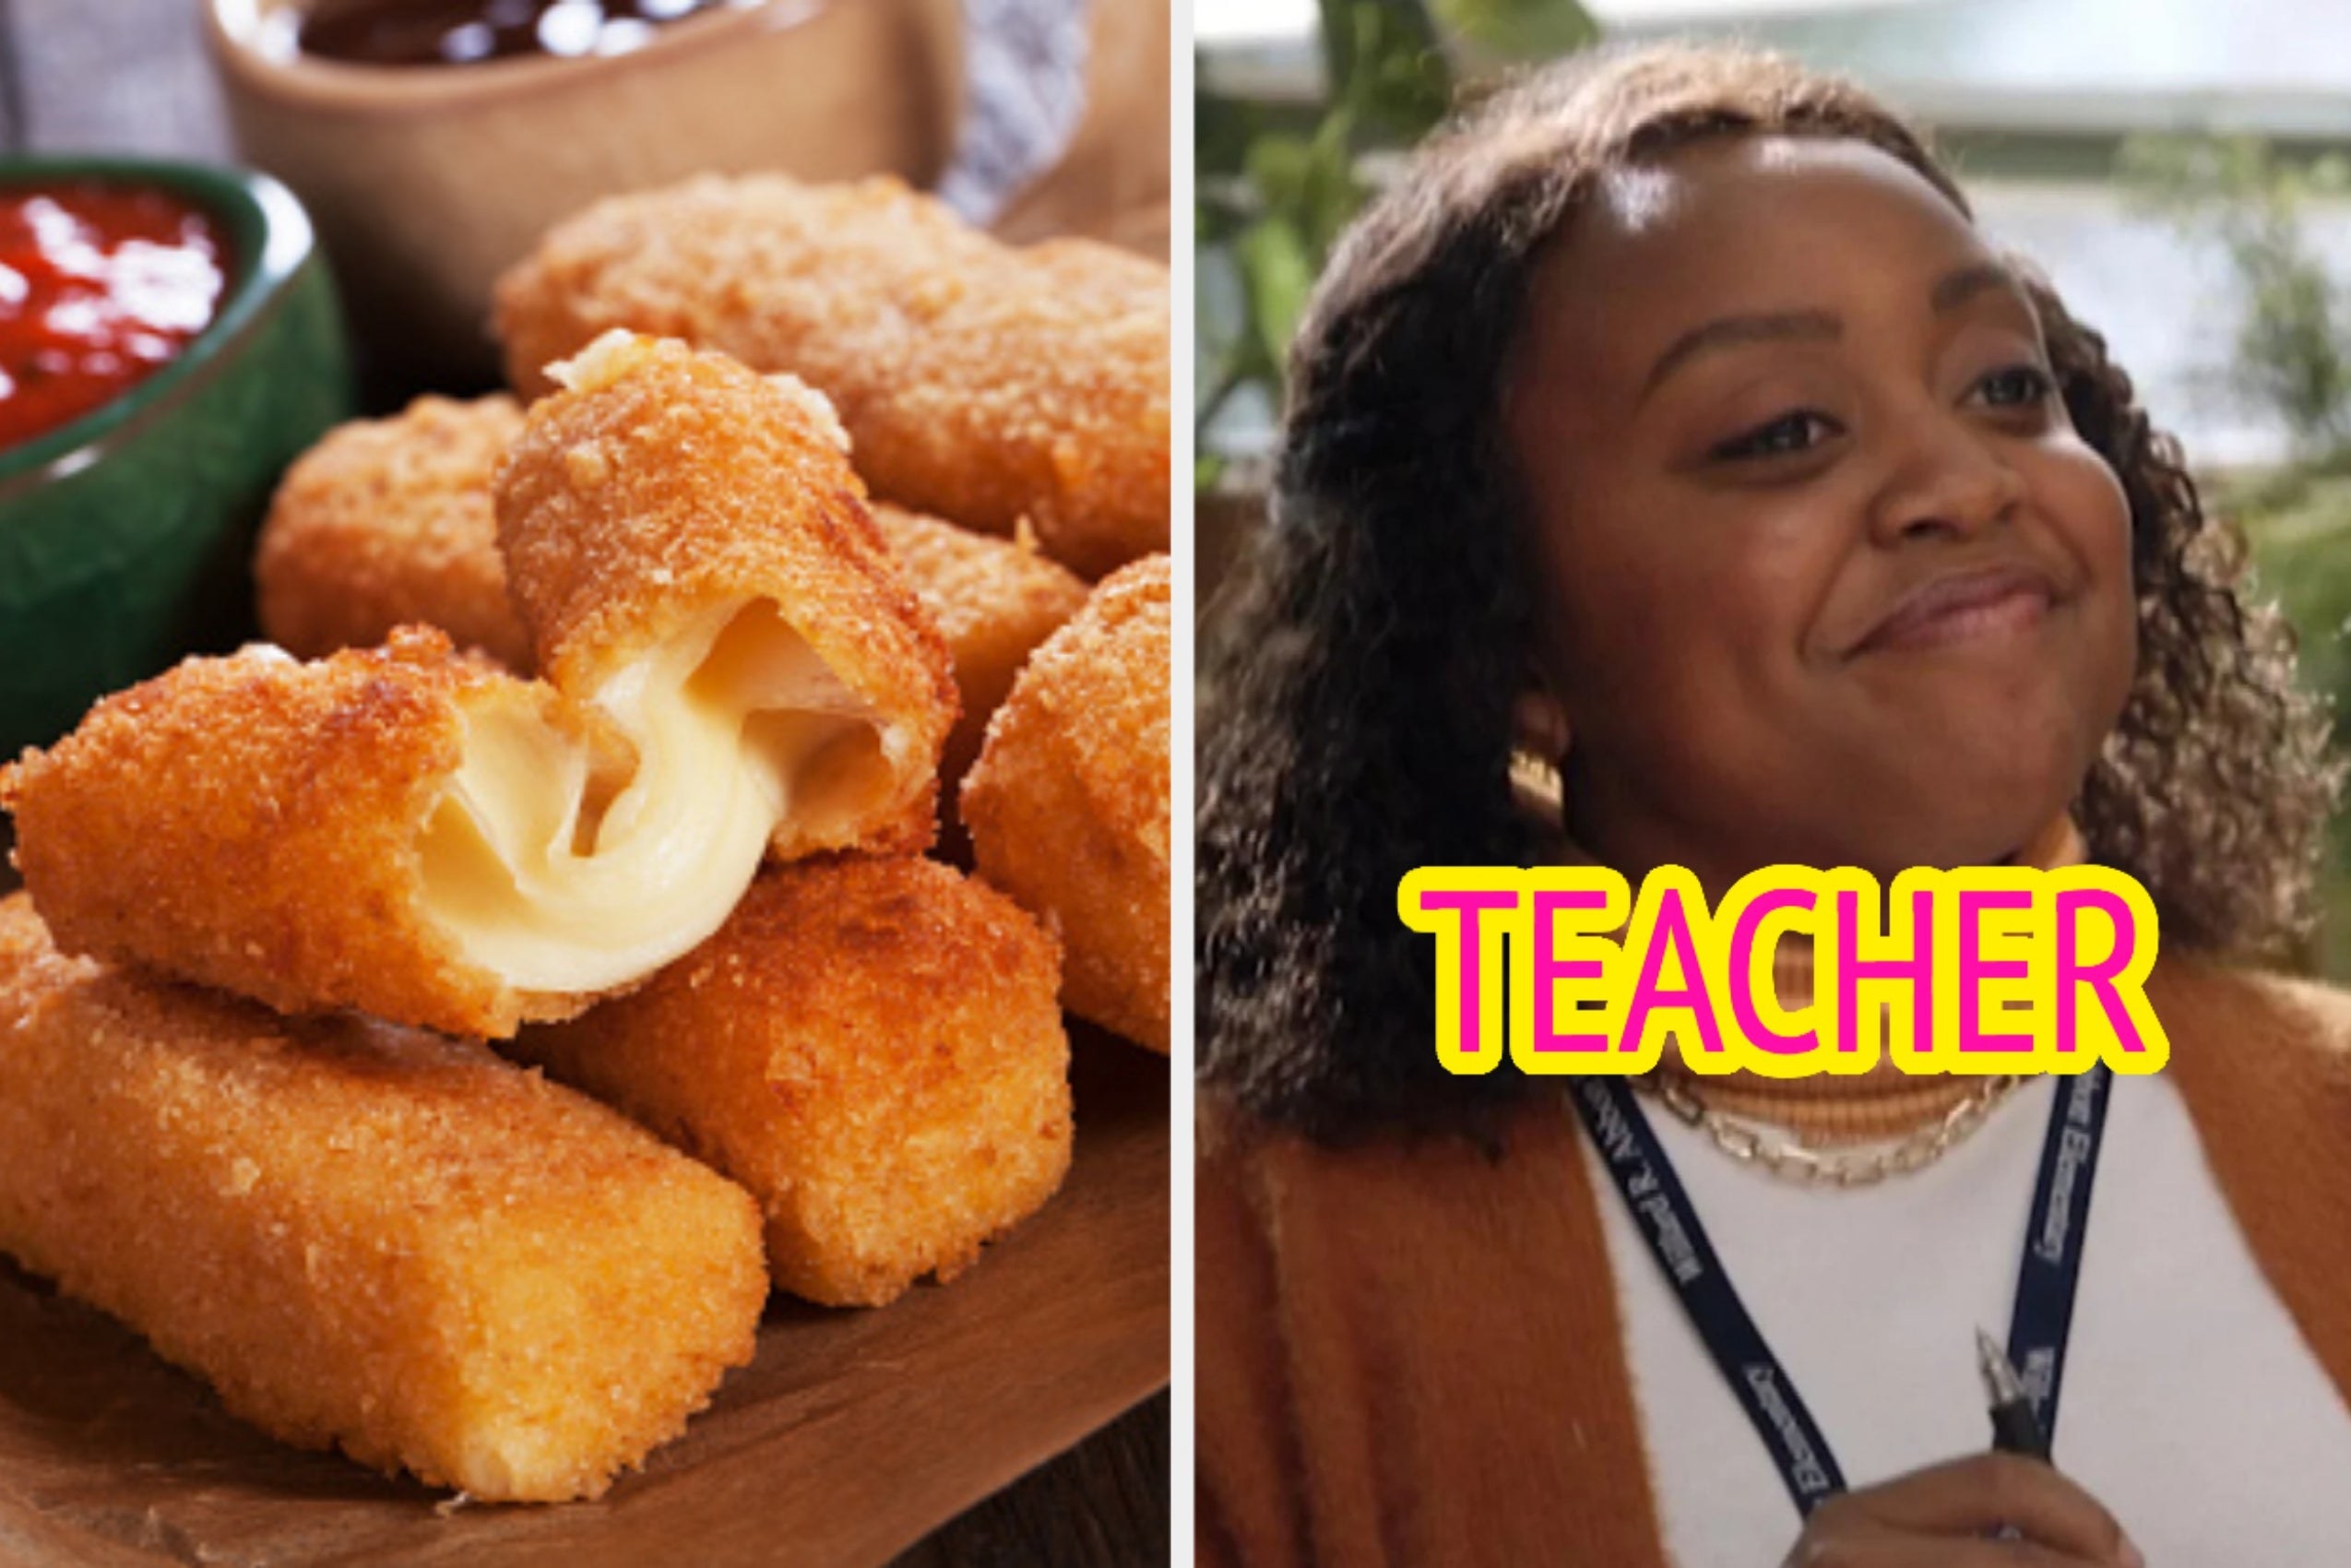 On the left, some mozzarella sticks, and on the right, Quinta Brunson as Jeanine on Abbott Elementary labeled teacher